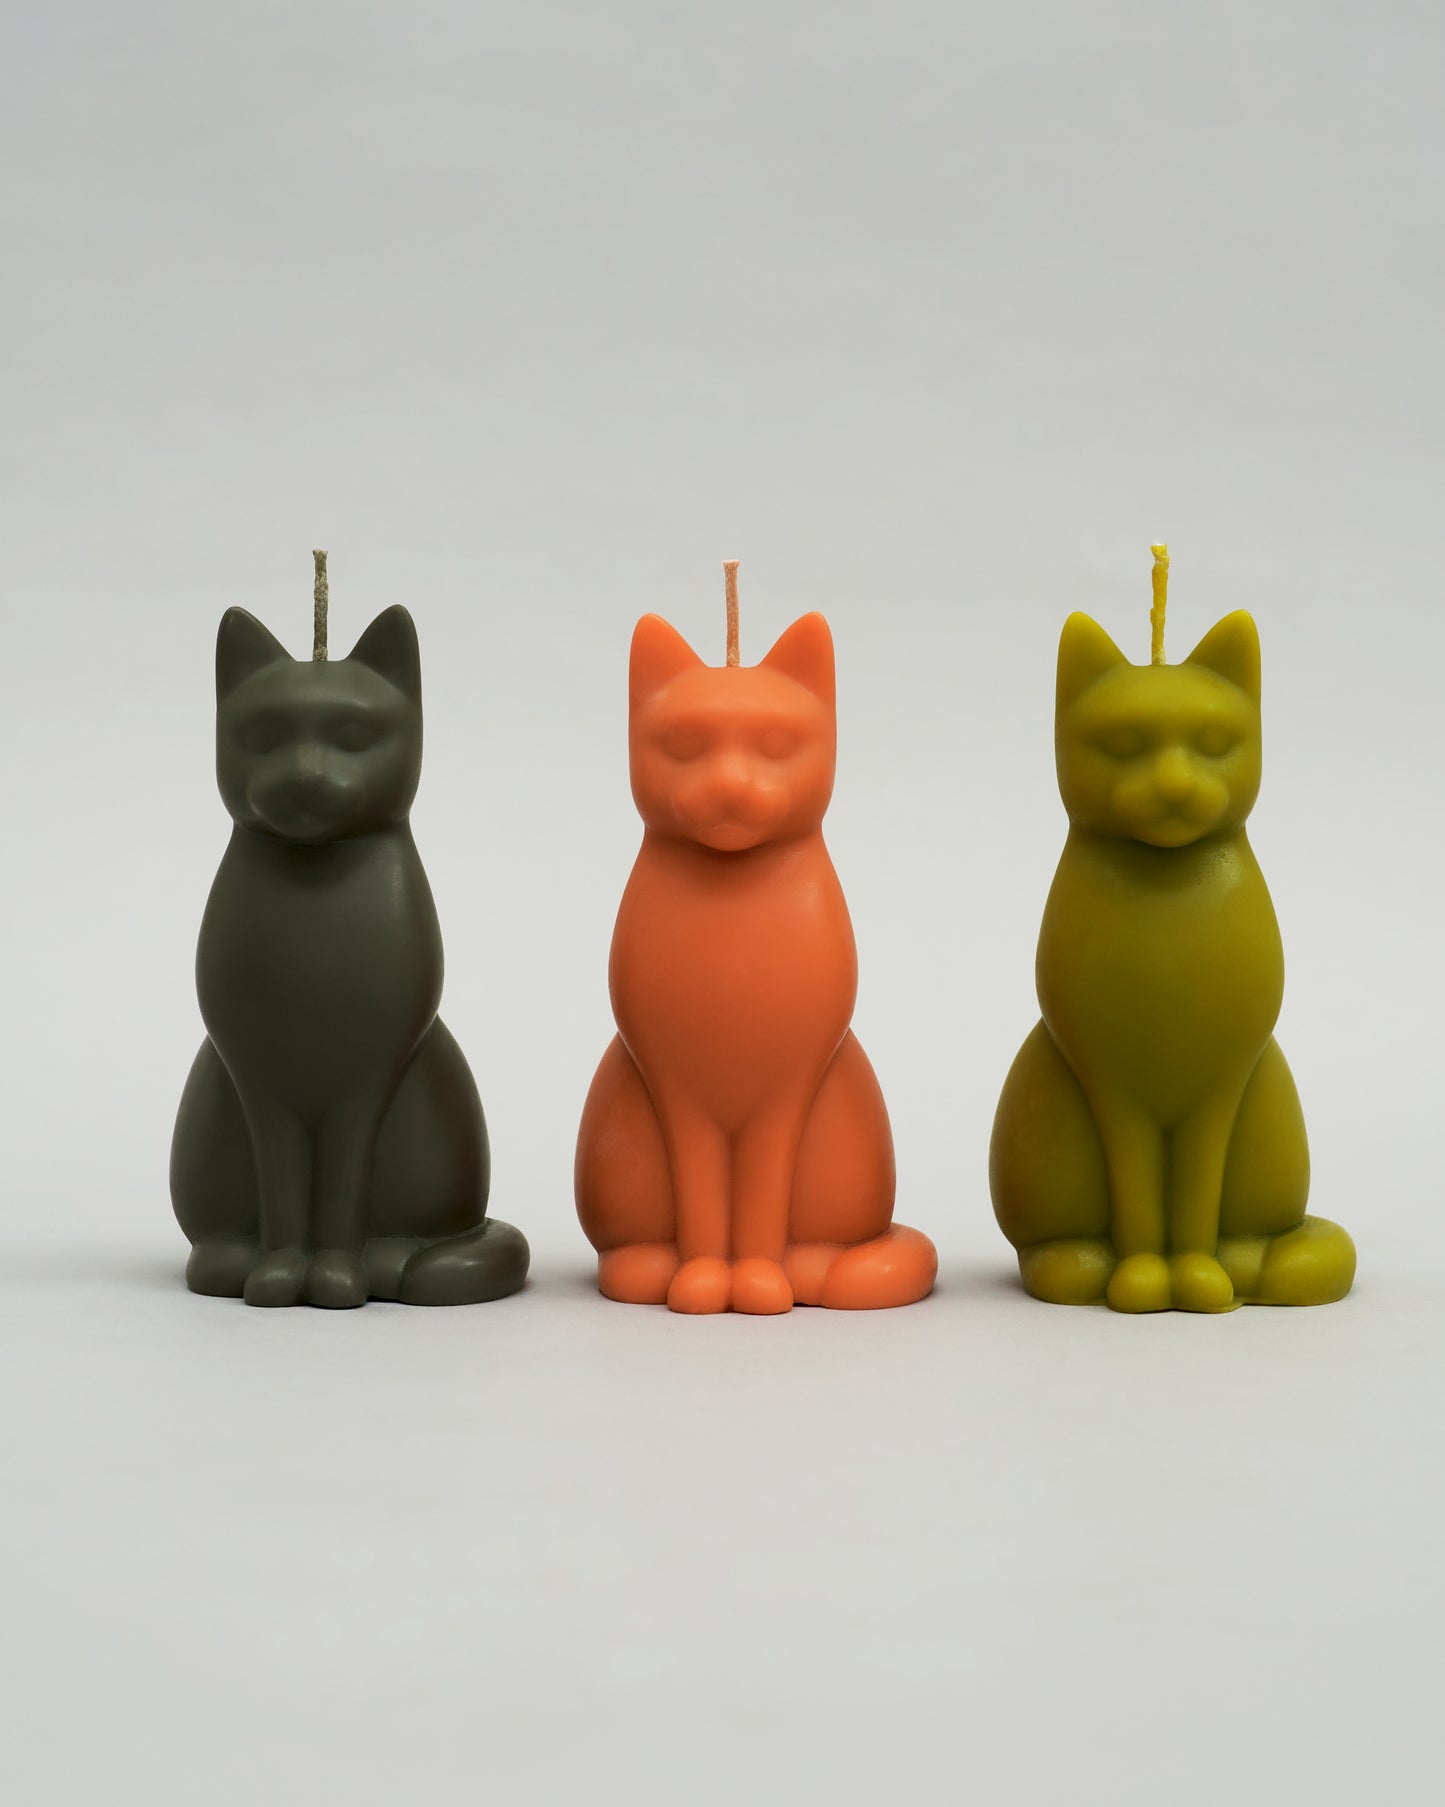 Cat Candle in "Pulya"